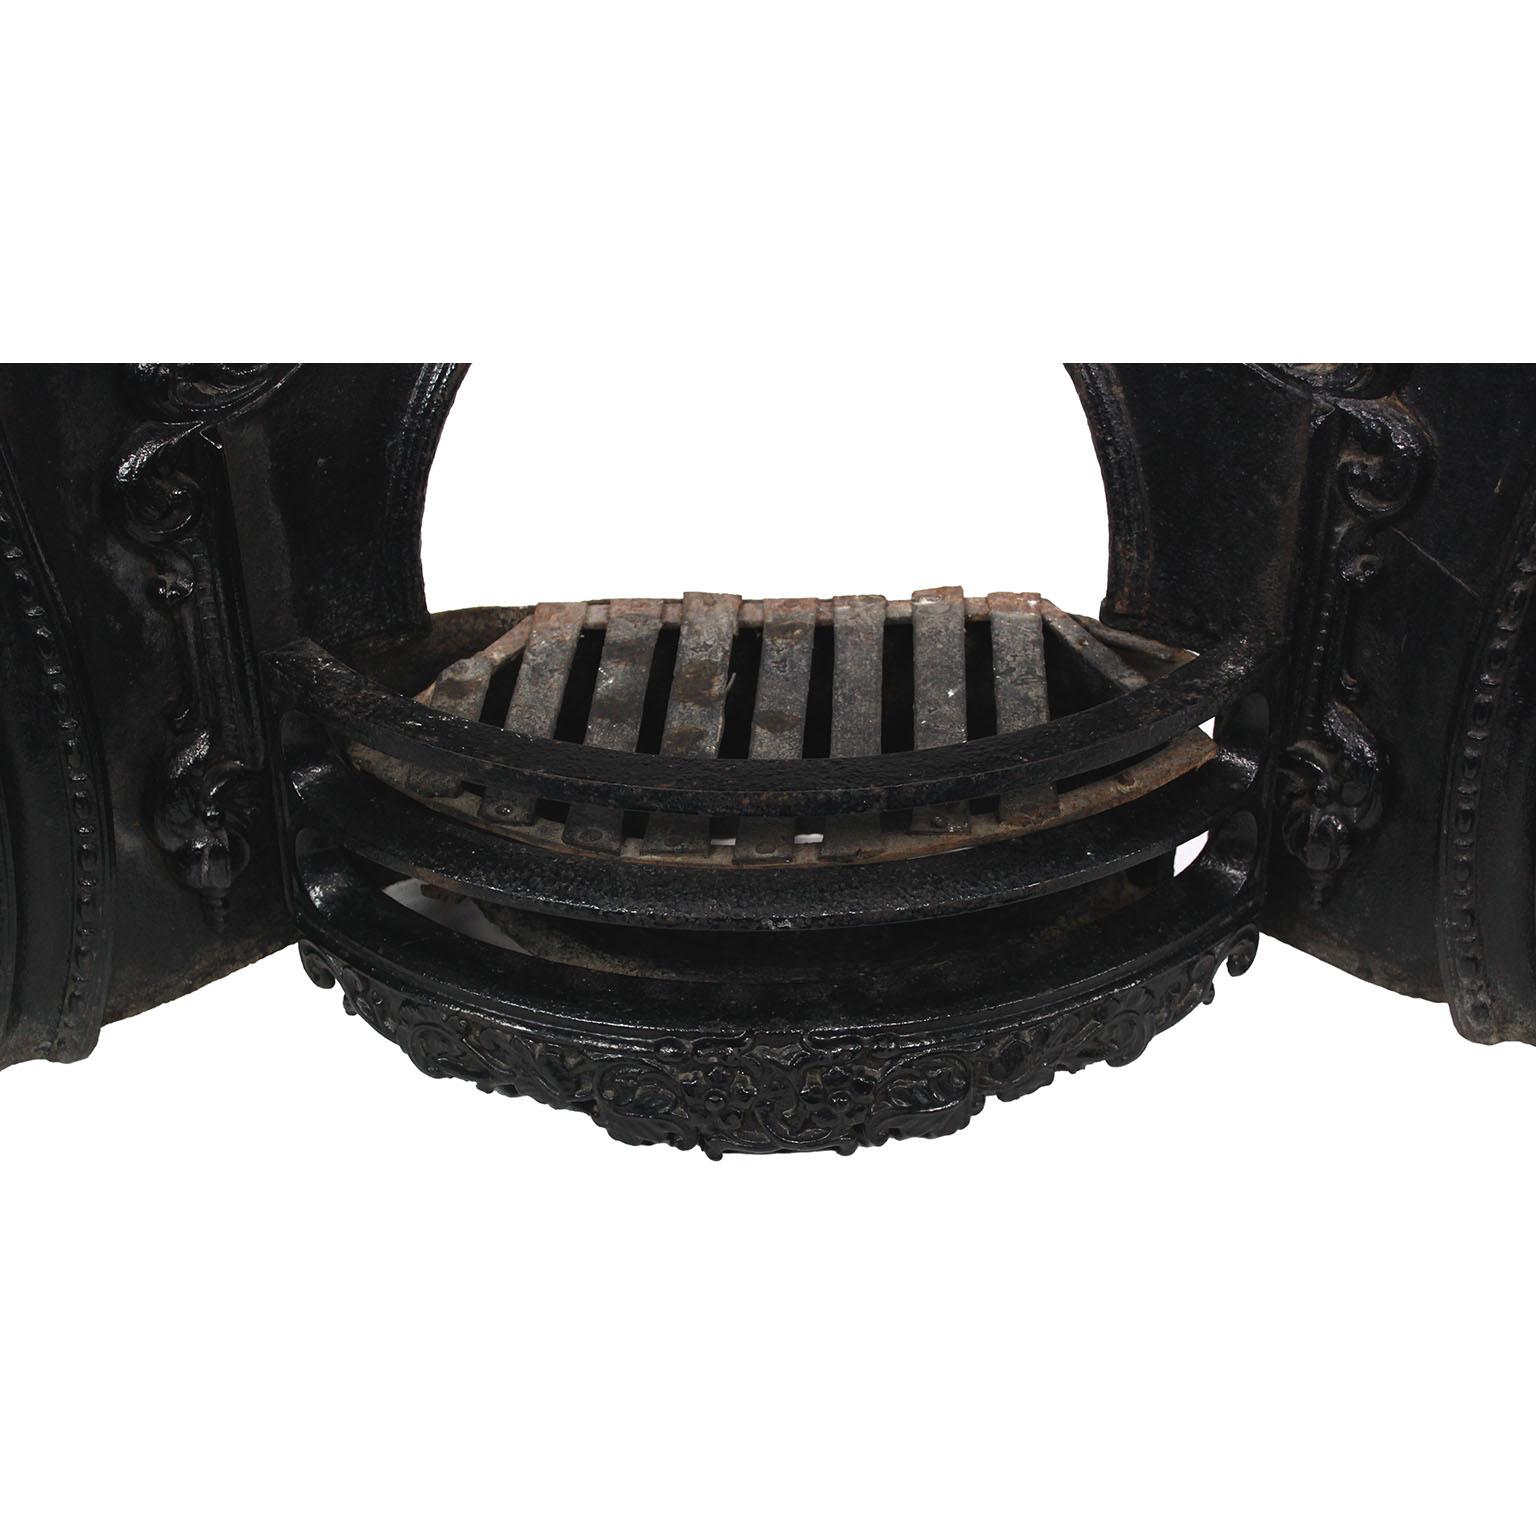 Metal A French 19th Century Cast Iron Fireplace Mantel Wood/Coal Register Insert Grate For Sale